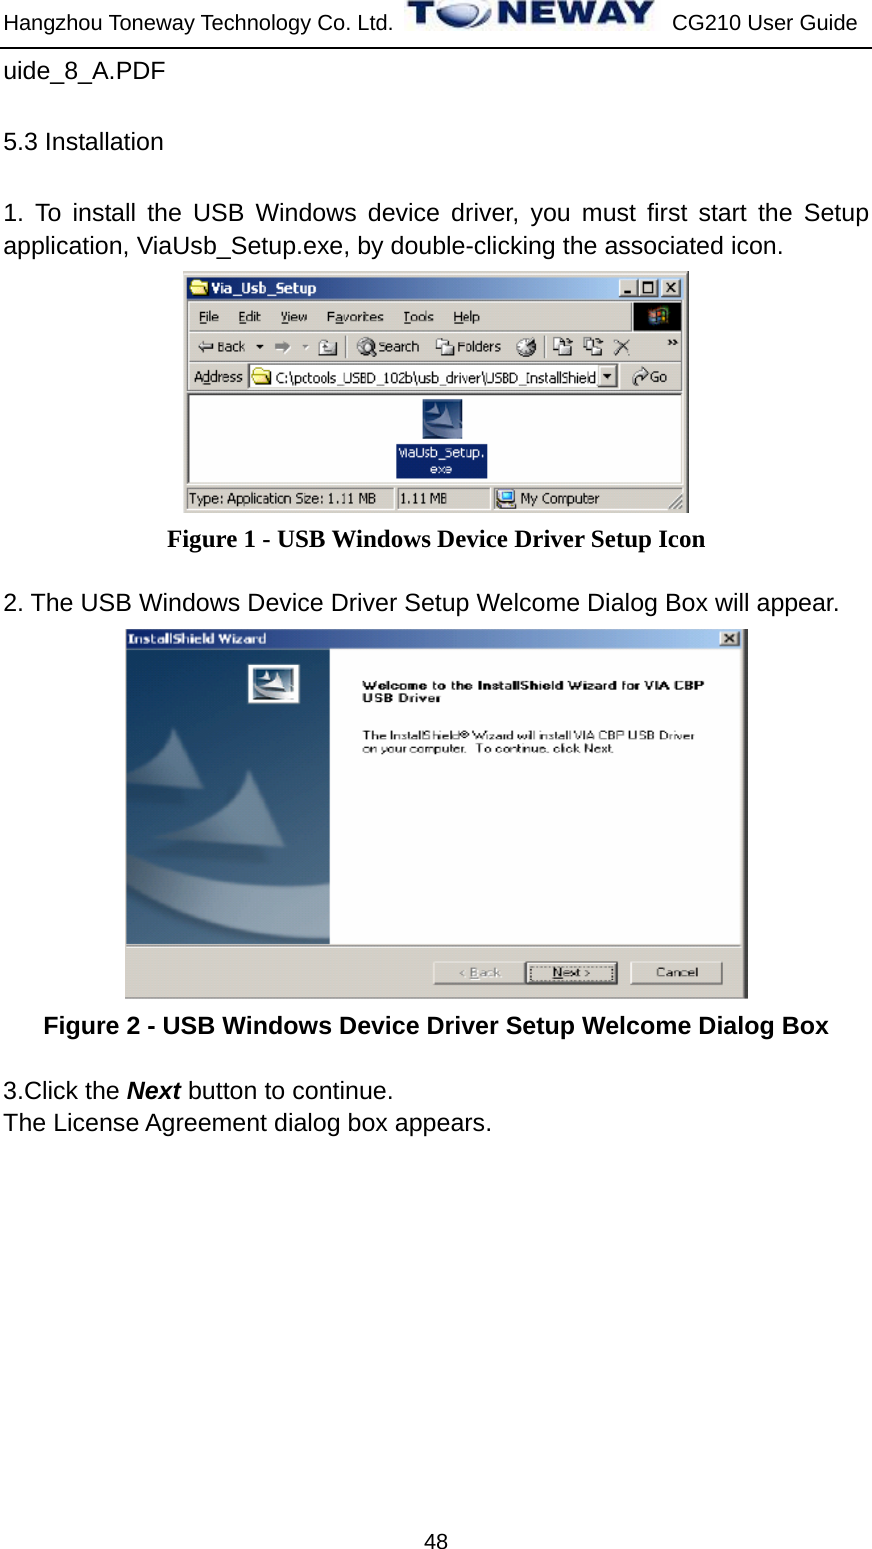 Hangzhou Toneway Technology Co. Ltd.    CG210 User Guide 48 uide_8_A.PDF 5.3 Installation 1. To install the USB Windows device driver, you must first start the Setup application, ViaUsb_Setup.exe, by double-clicking the associated icon.  Figure 1 - USB Windows Device Driver Setup Icon  2. The USB Windows Device Driver Setup Welcome Dialog Box will appear.  Figure 2 - USB Windows Device Driver Setup Welcome Dialog Box  3.Click the Next button to continue. The License Agreement dialog box appears. 